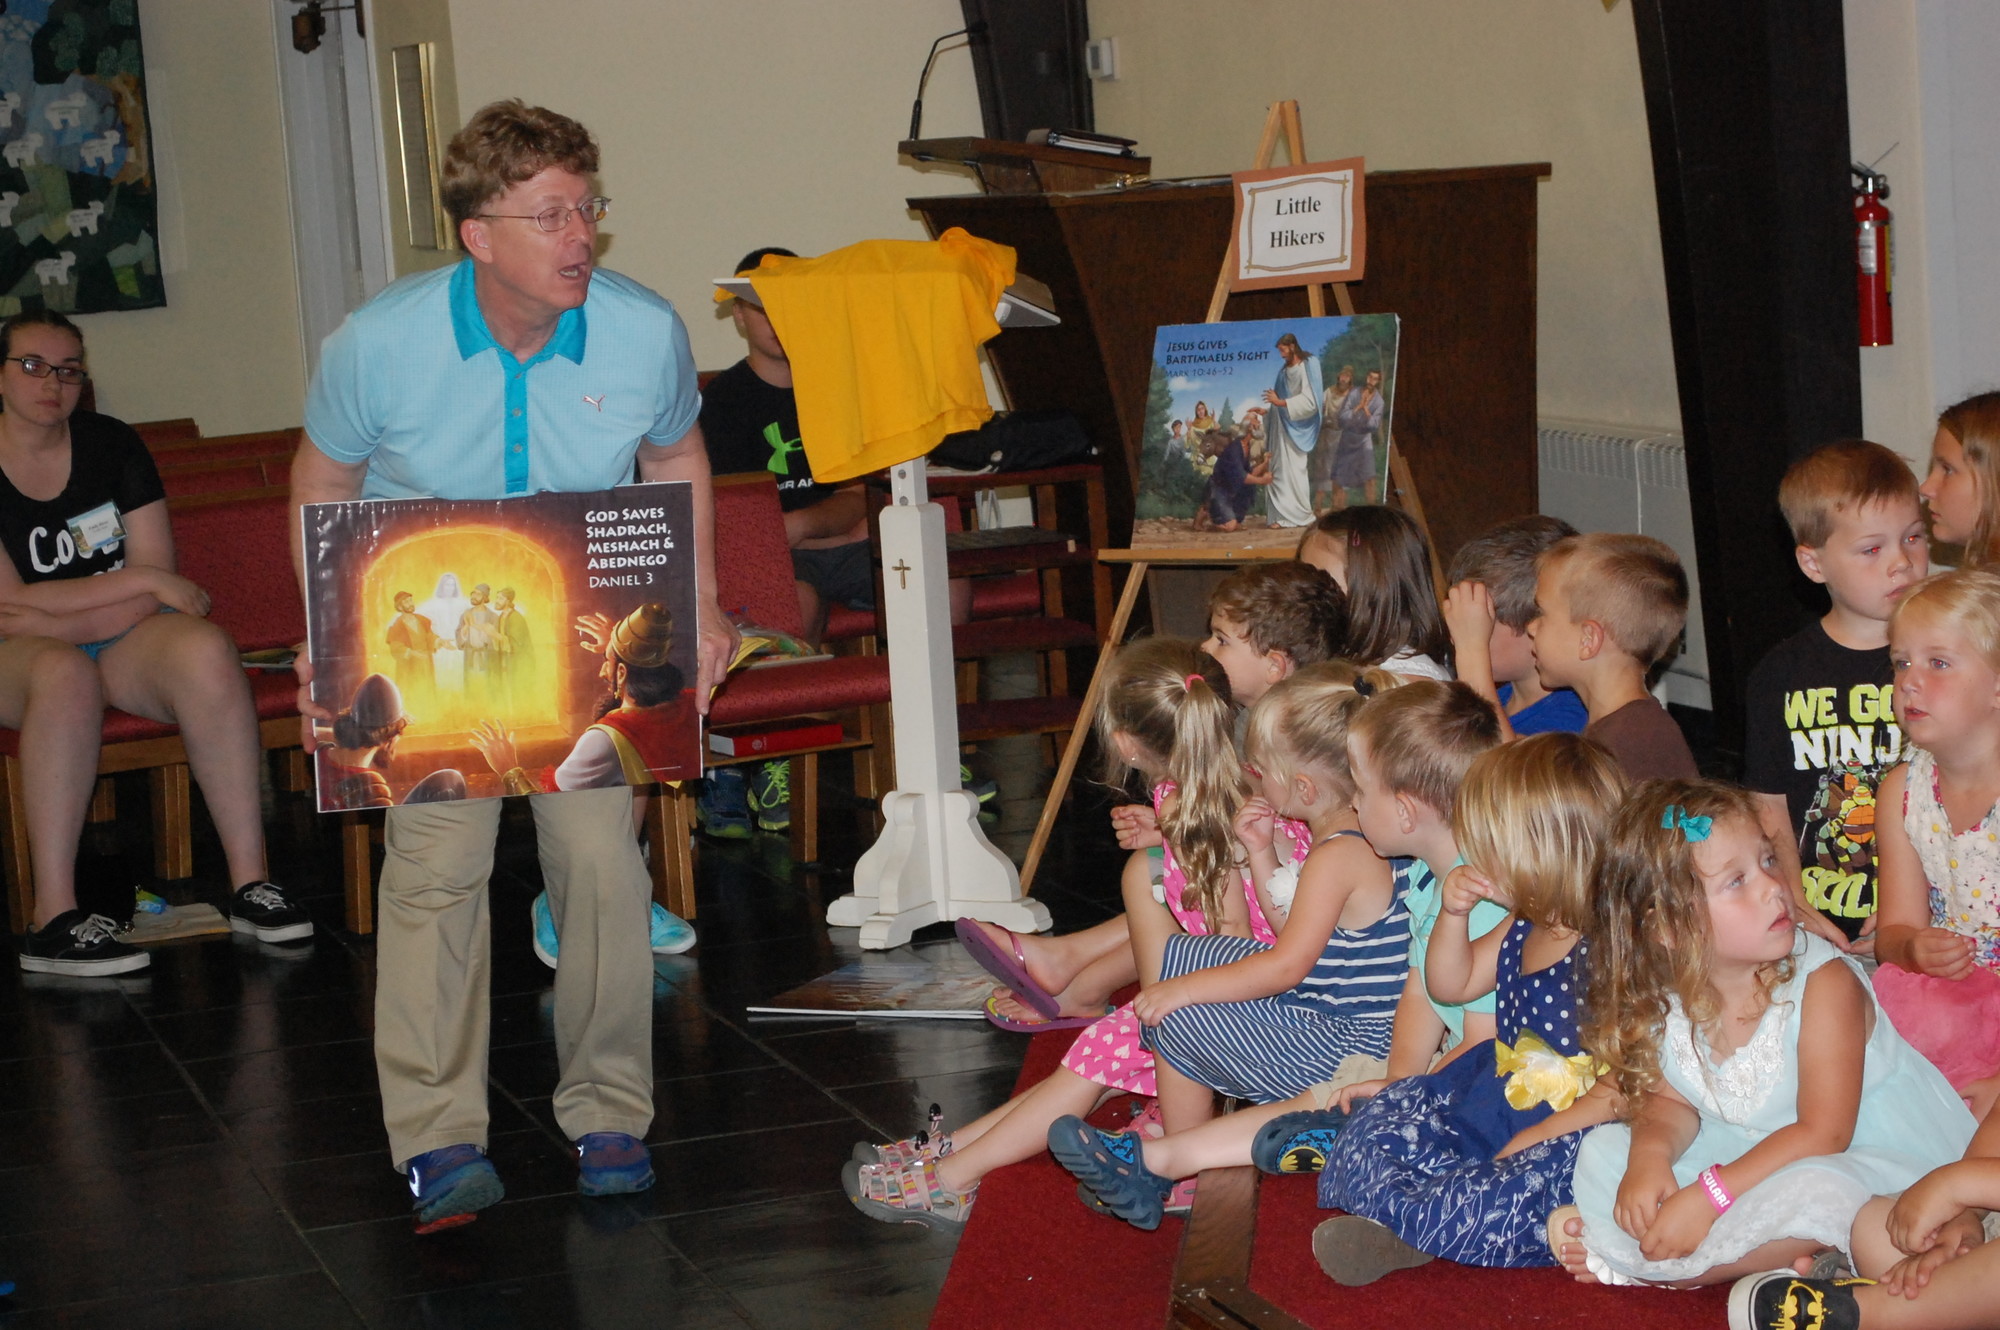 The Rev. Martin Nale went over Bible lessons with the children.